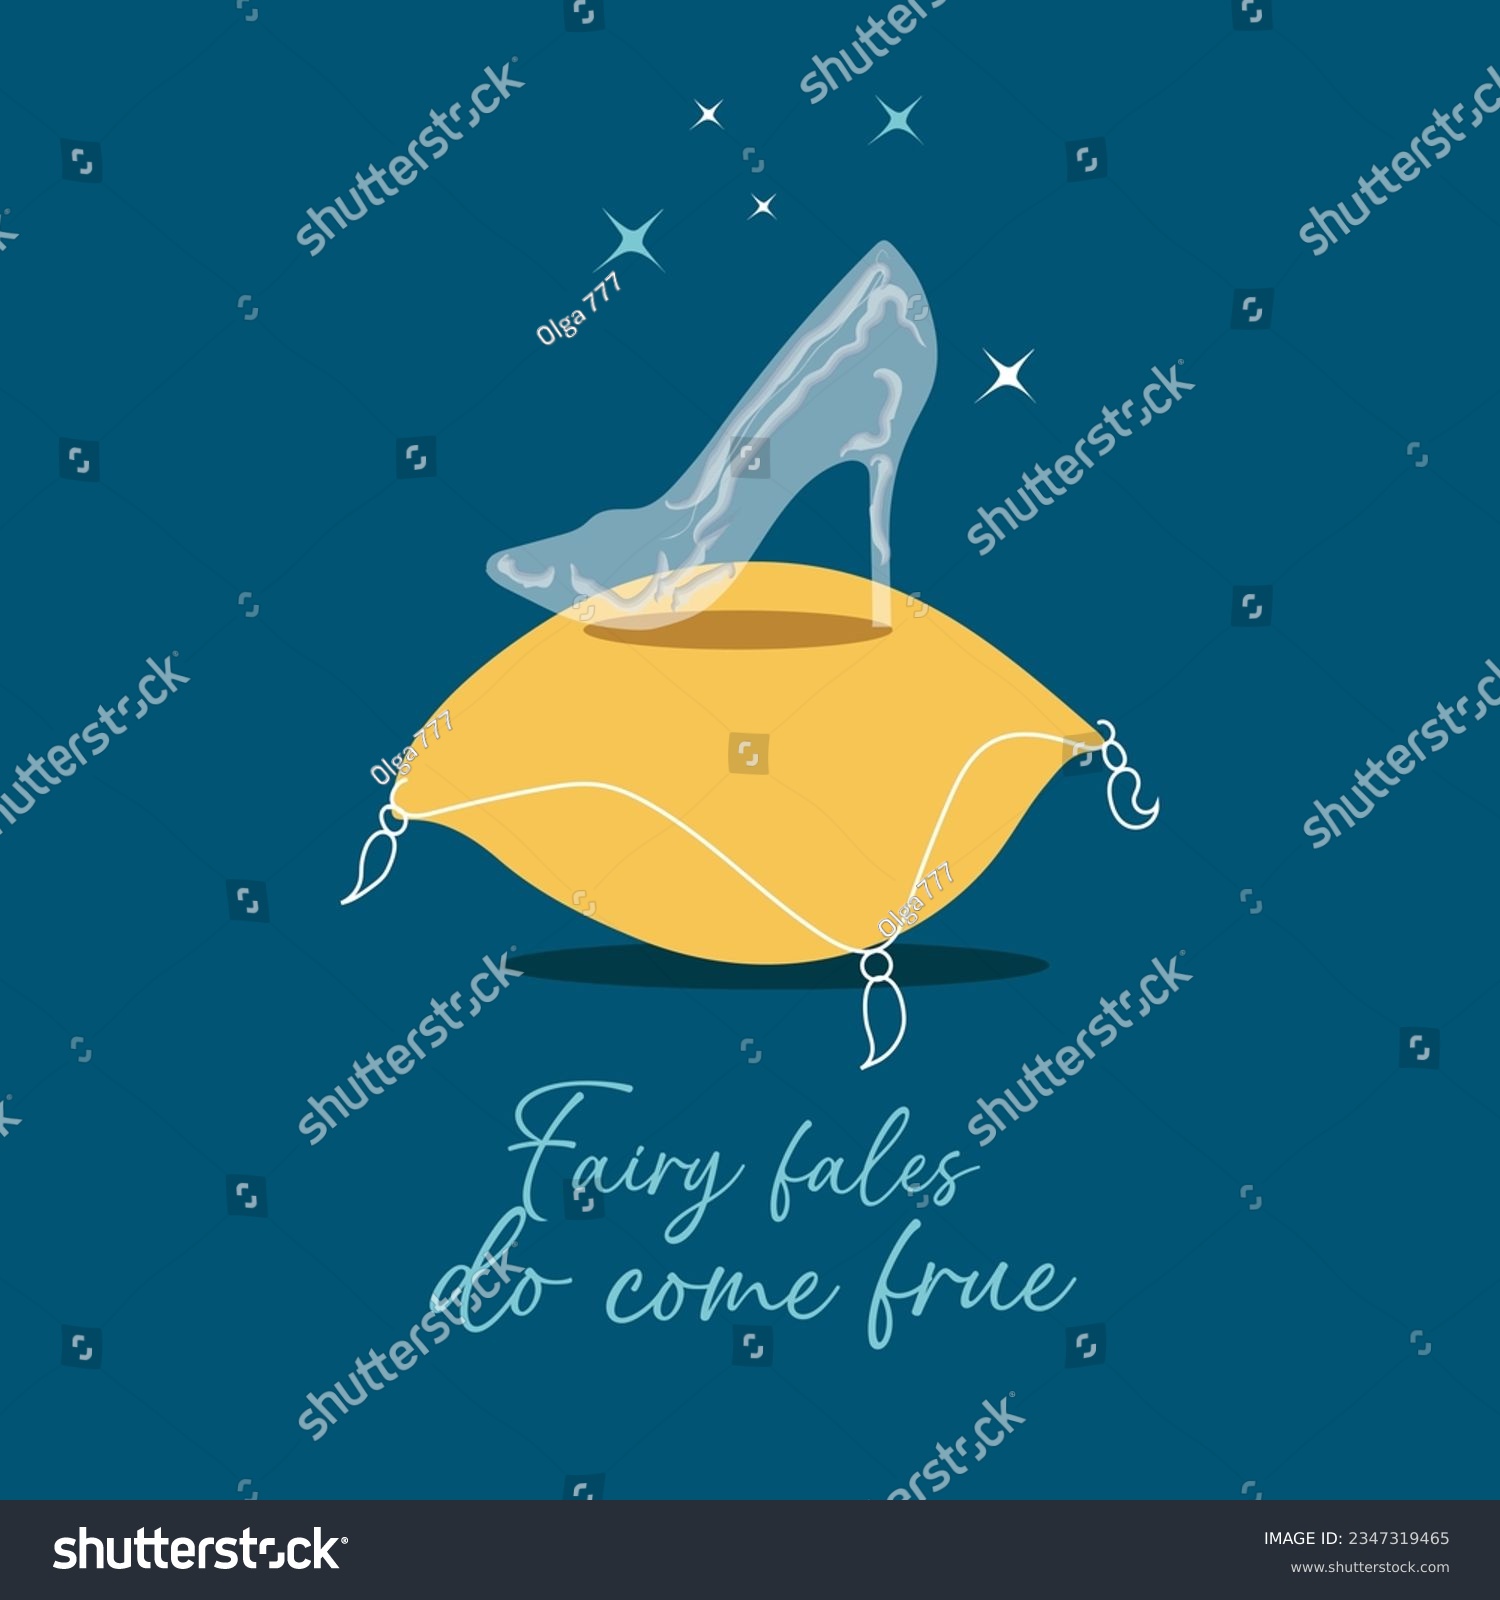 SVG of Wedding card isolated. Cinderella's glass slipper on a pillow,dating  blind date concept. Vector illustration with text on dark blue background.  svg